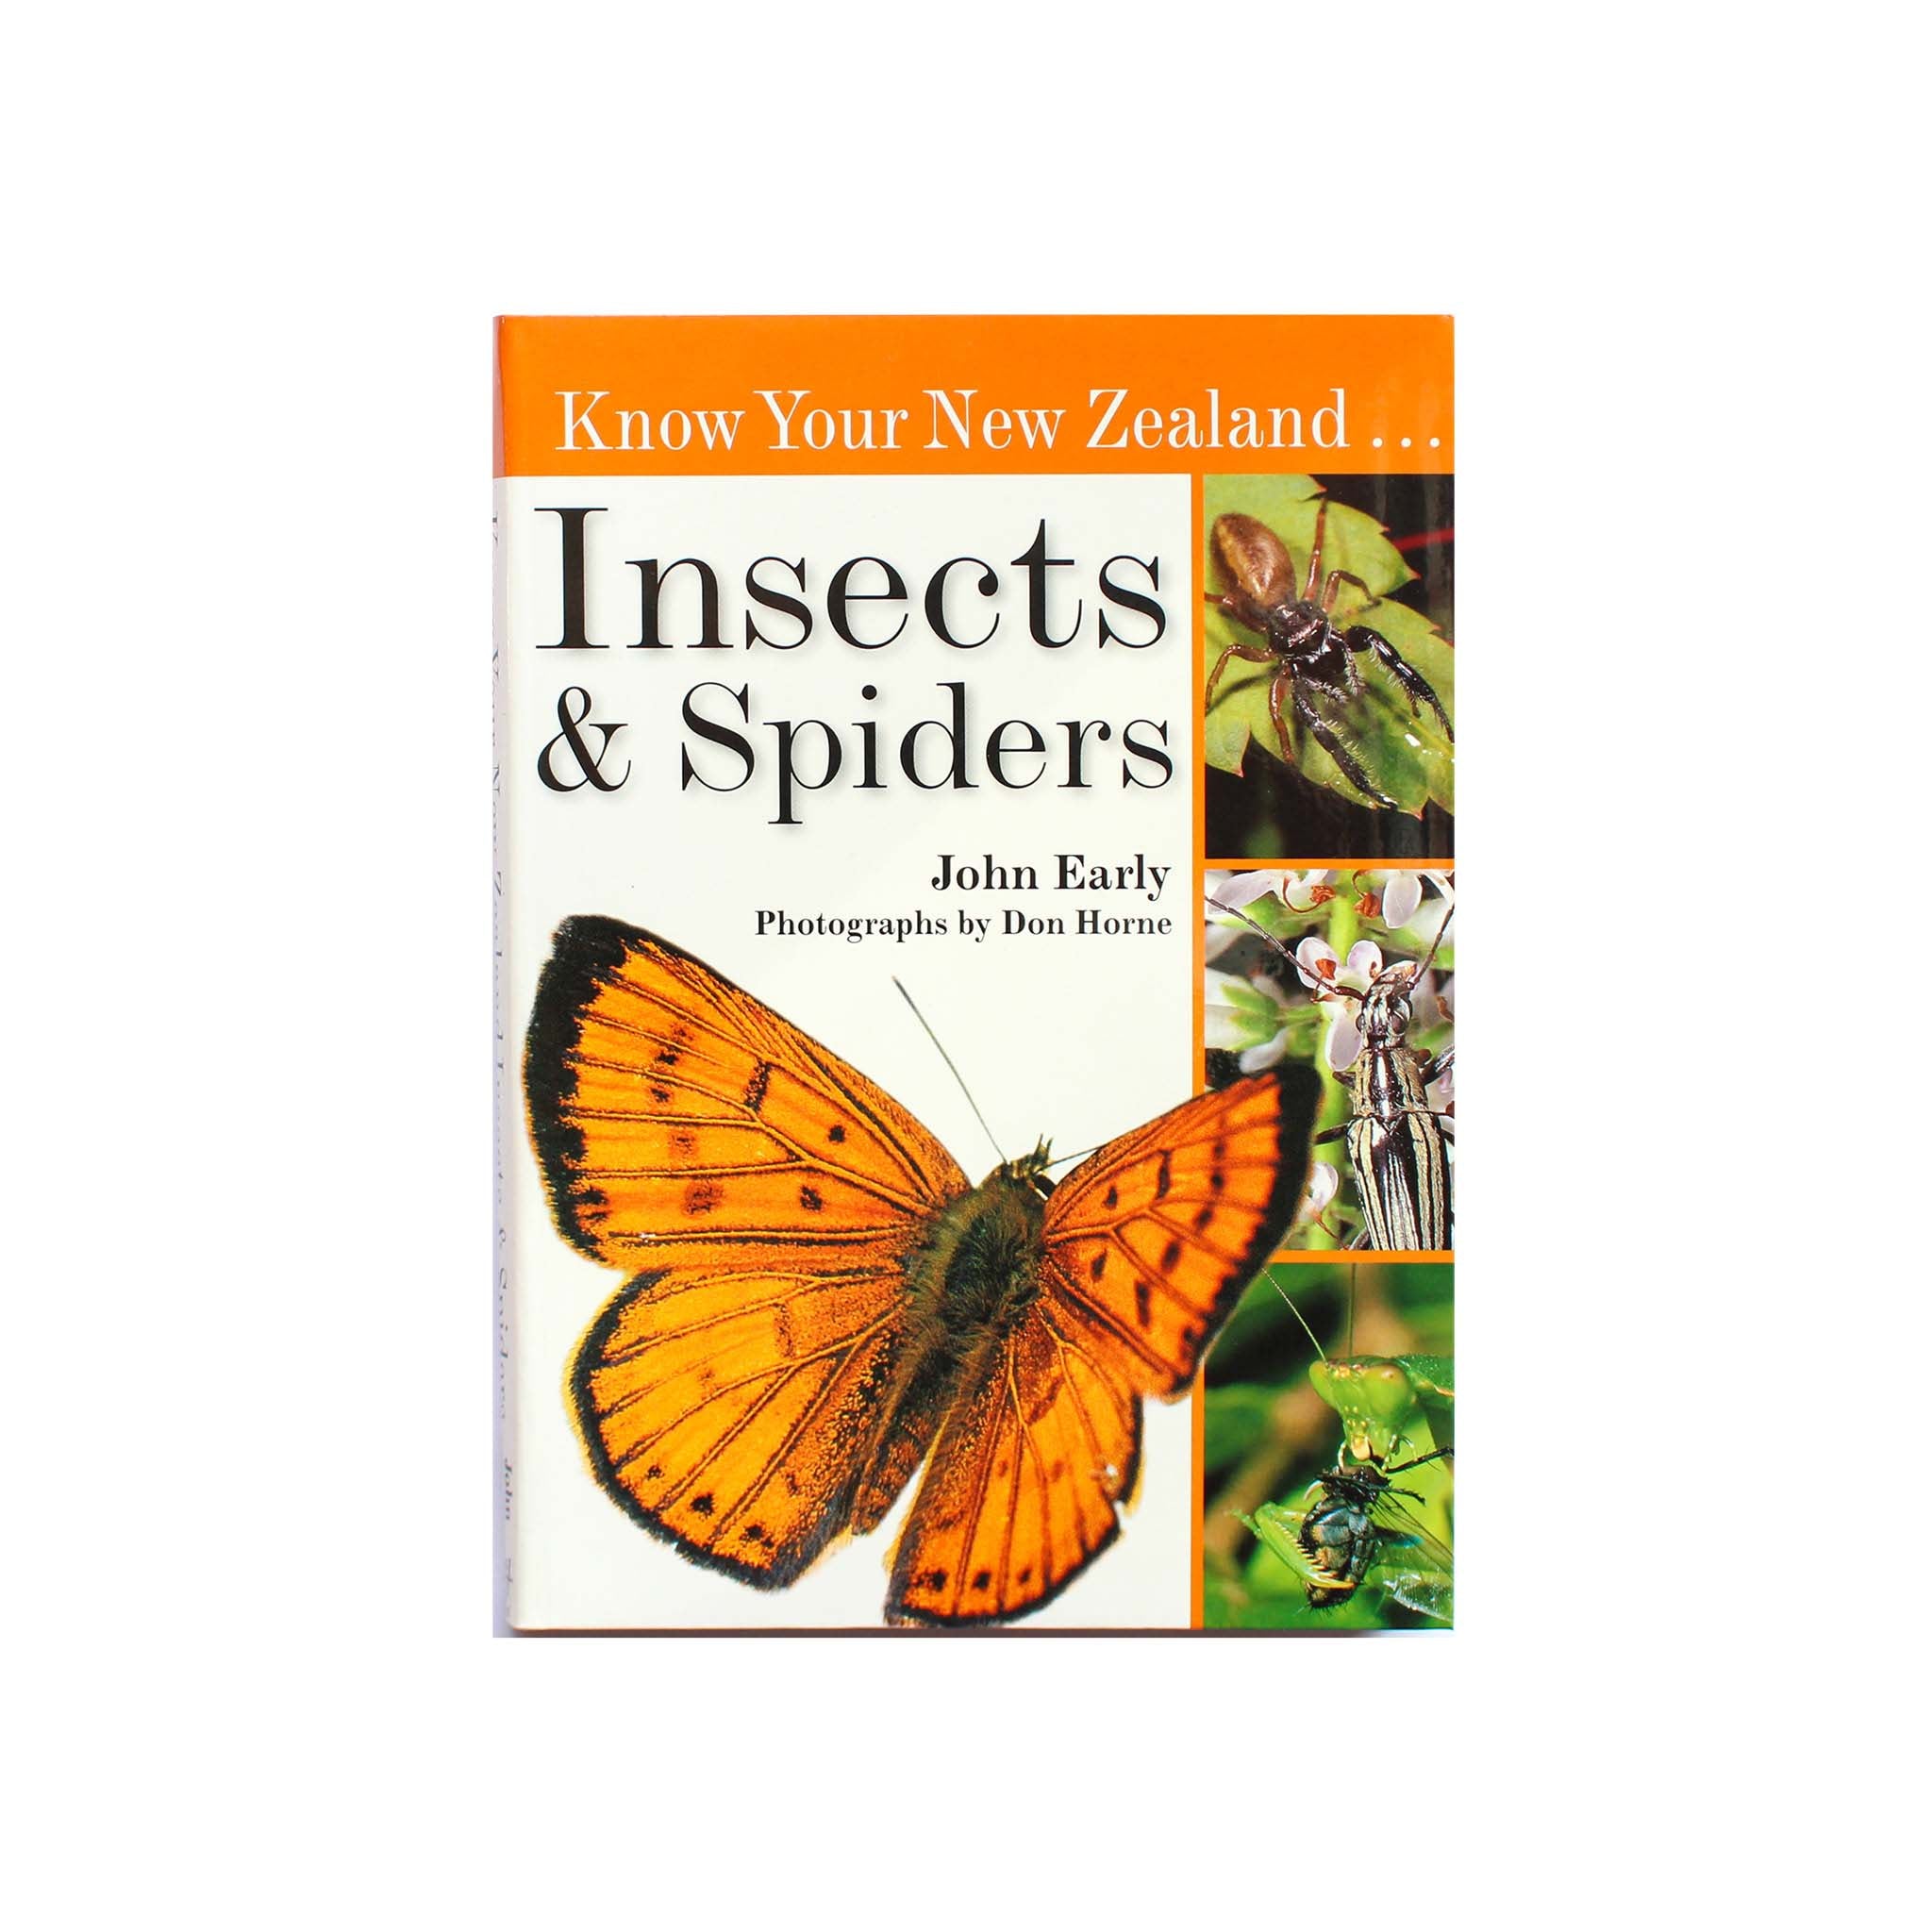 Know Your New Zealand ... Insects & Spiders